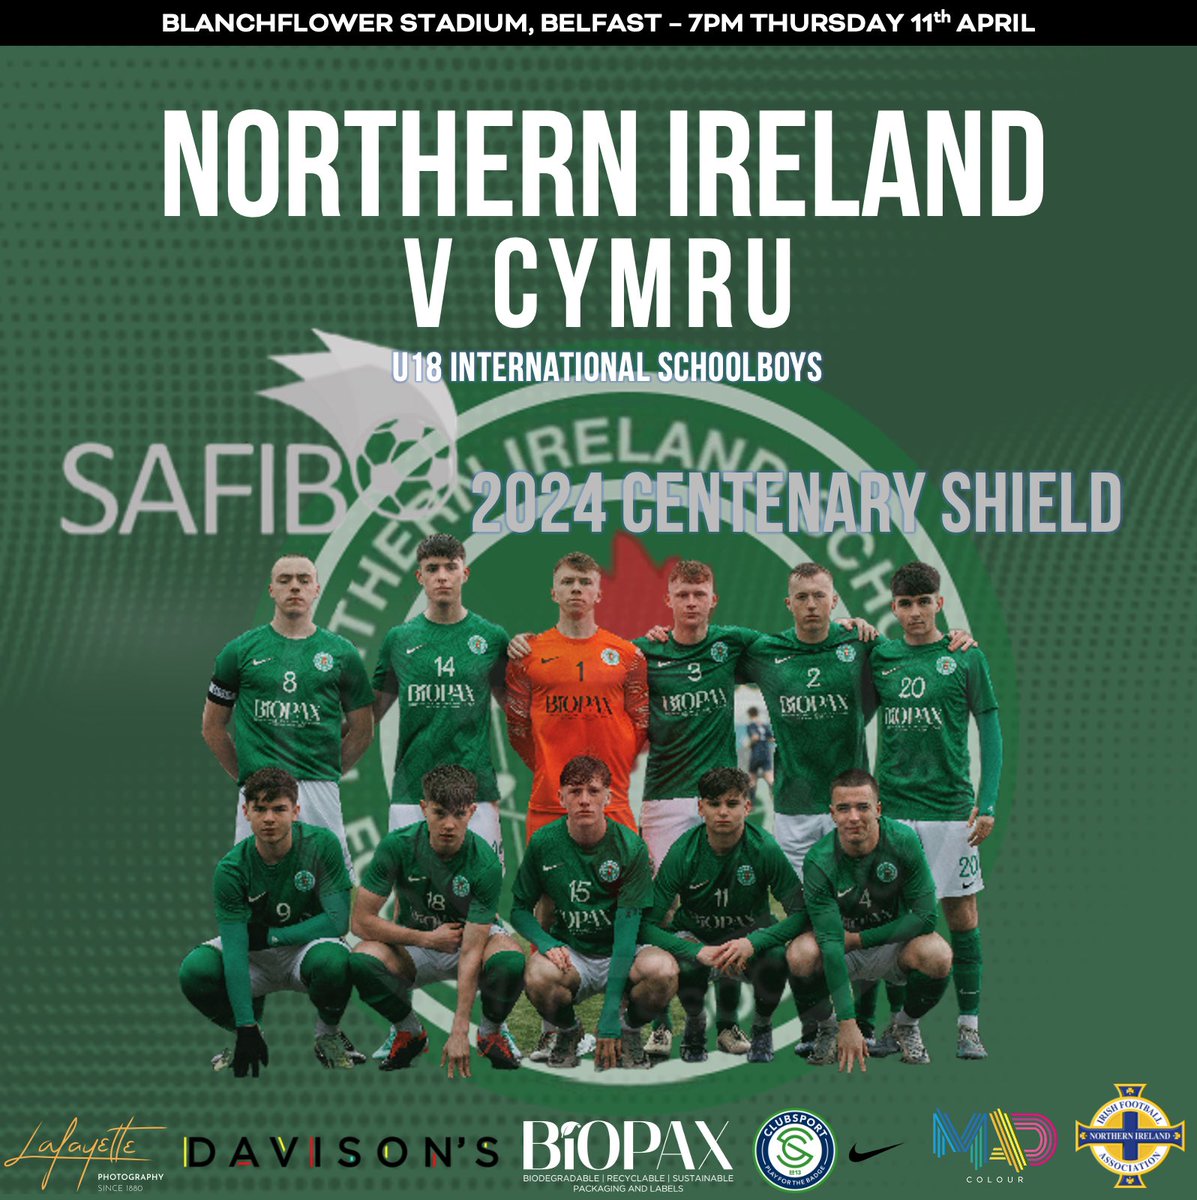 The U18 Centenary Shield, as it stands going into NI’s final fixture at home next Thursday: Country Pld W D L F A Pts N. Ireland 3 3 0 0 7 1 9 Cymru 2 2 0 0 7 3 6 R. Ireland 2 0 1 1 2 3 1 Scotland 3 0 1 2 3 7 1 England 2 0 0 2 1 6 0